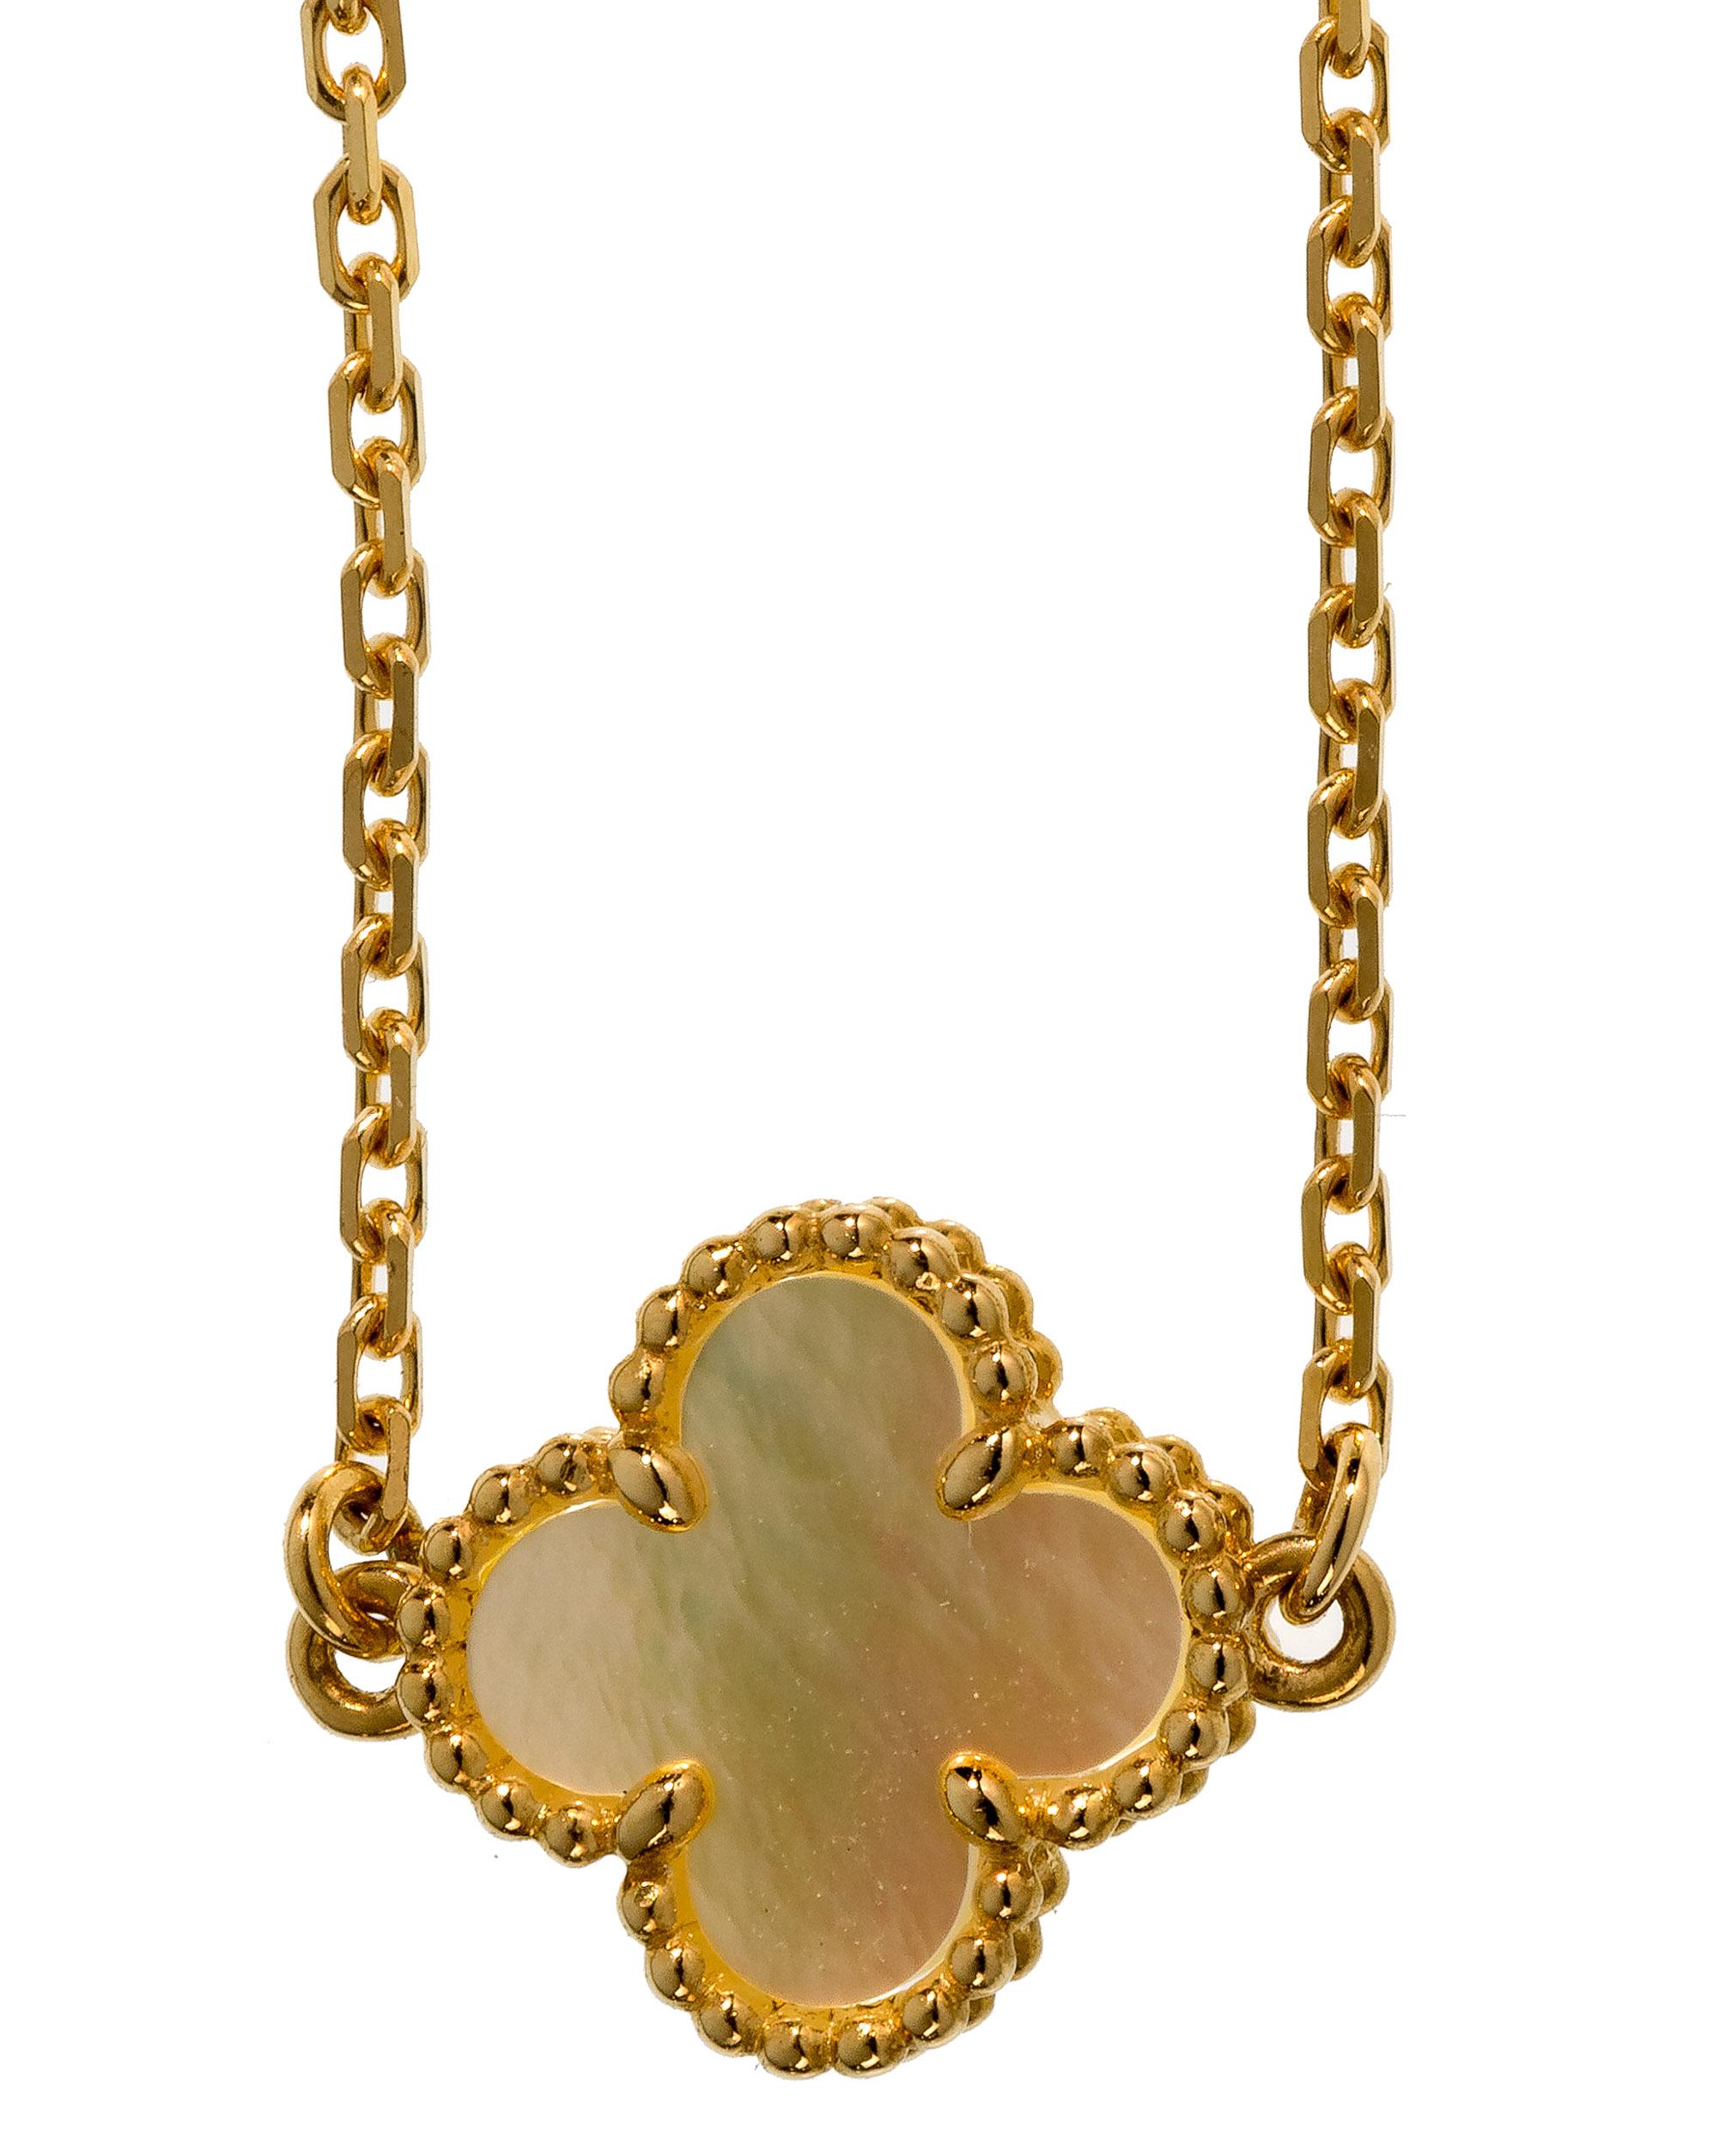 Van Cleef & Arpels 'Alhambra' 18k Gold and Mother of Pearl Necklace and Bracelet